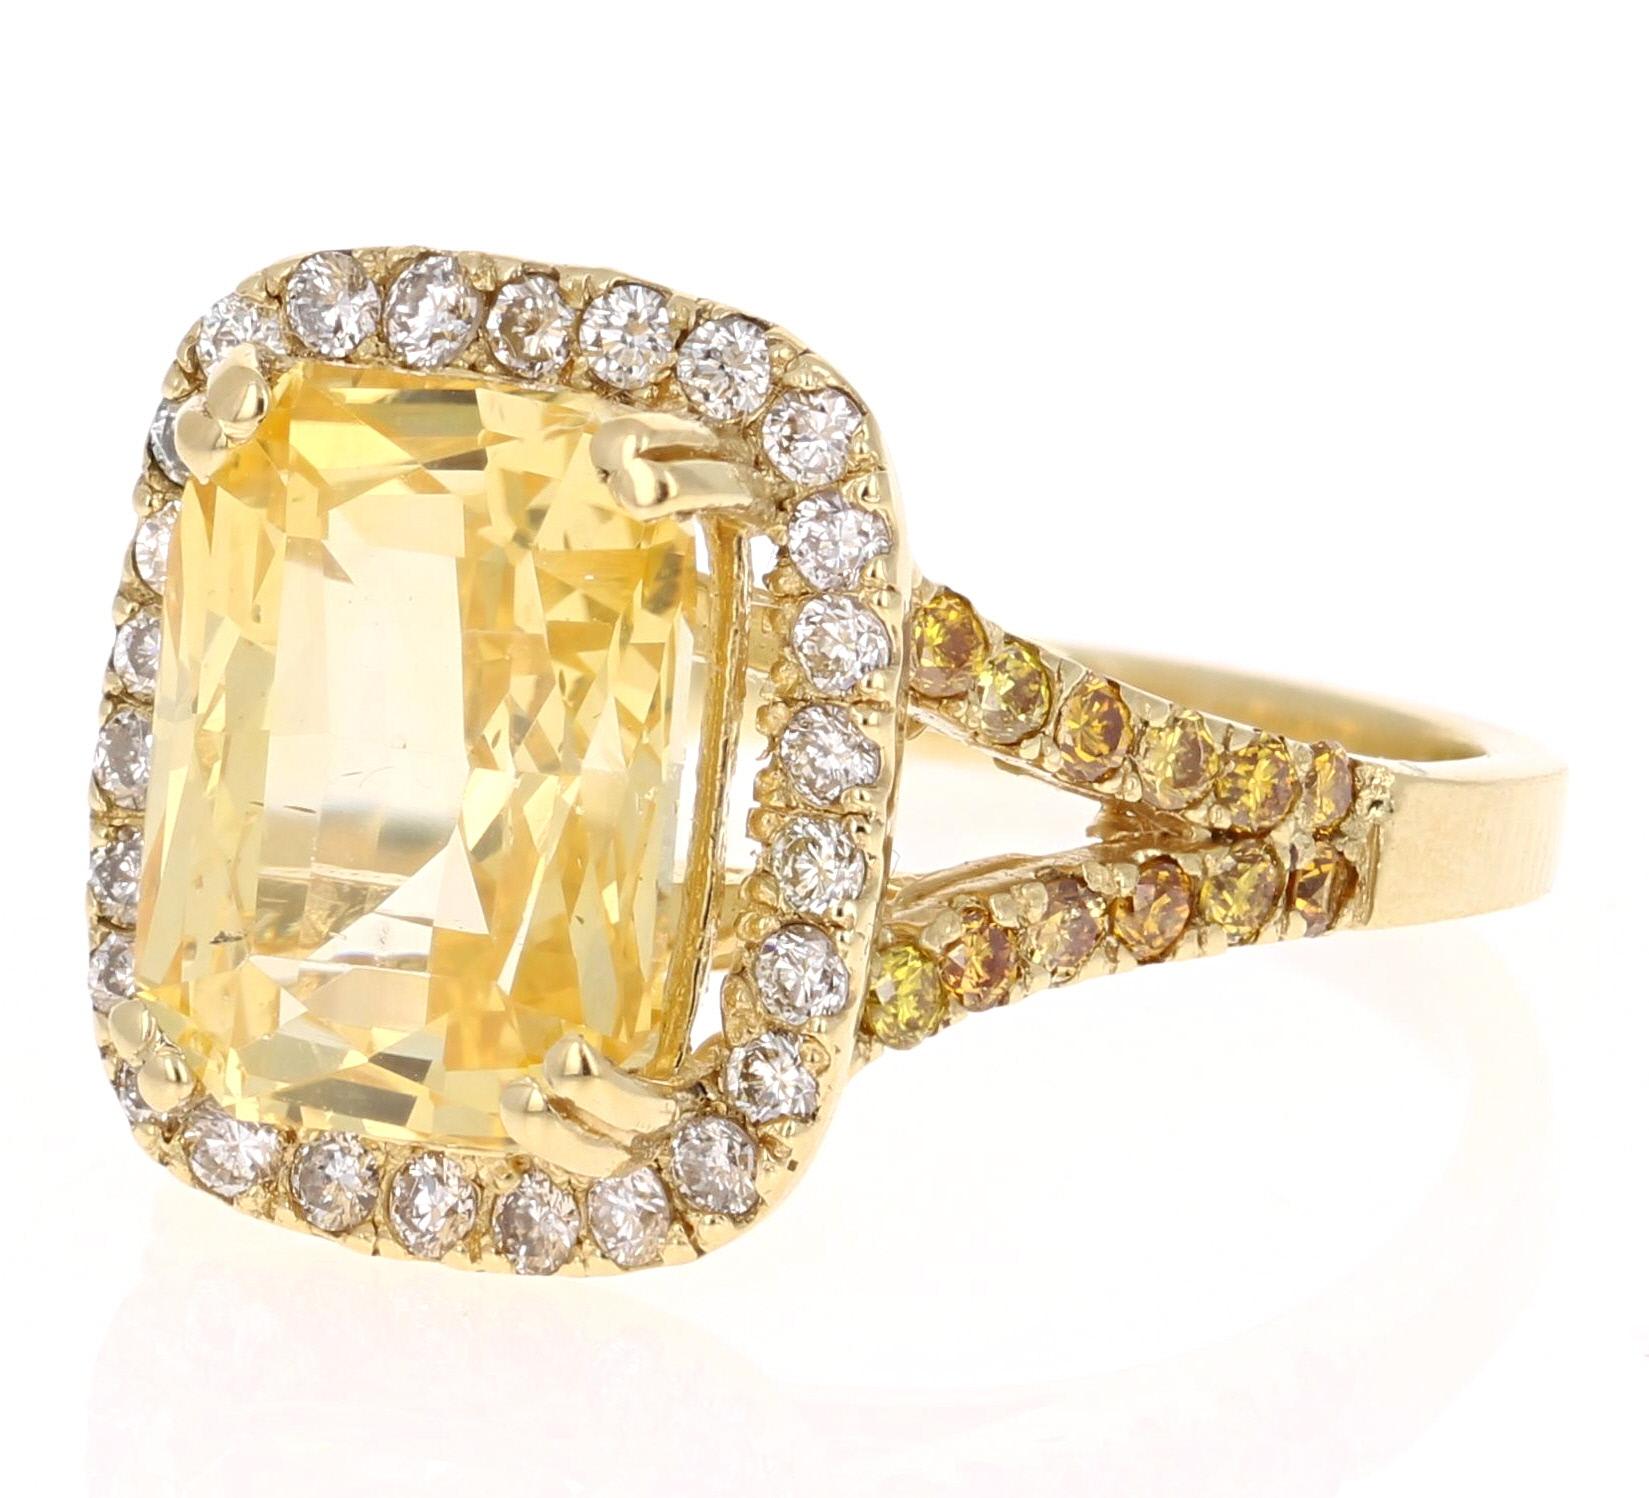 Stunning Yellow Sapphire Non-Heated GIA Certified Ring! 

This ring has a Octagonal Shape Yellow Sapphire that is GIA Certified. GIA Certificate number is: 1172570583. The Yellow Sapphire is natural and is 
 a non-heated stone. 

It is surrounded by